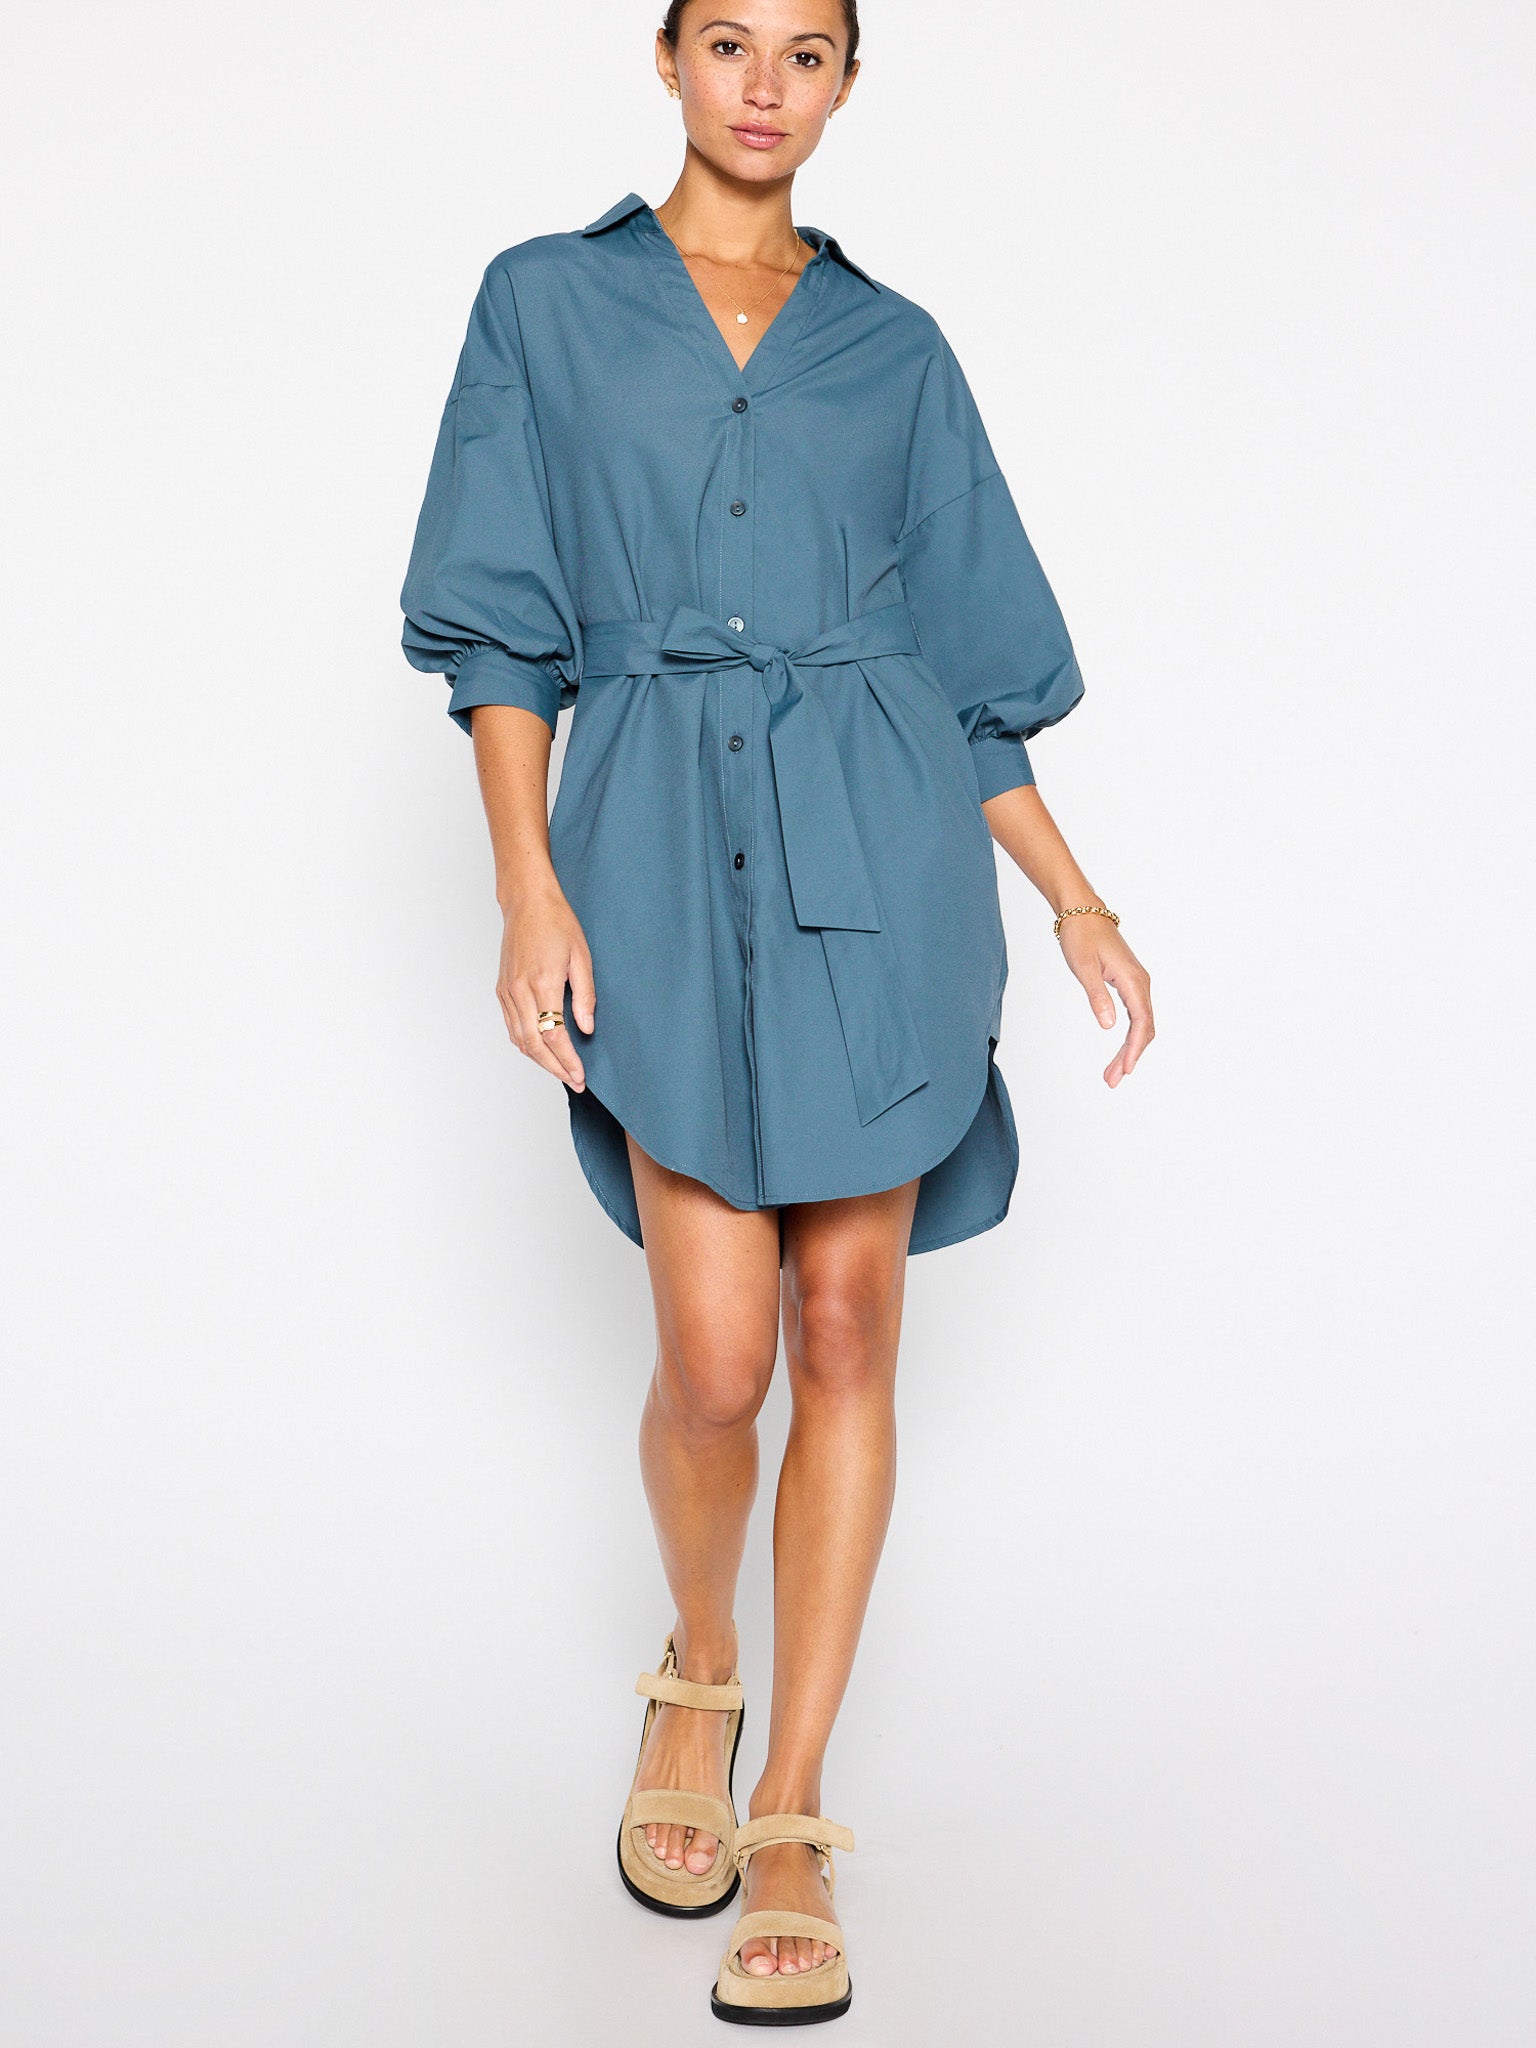 Kate belted button up mini dress blue gray front view 3